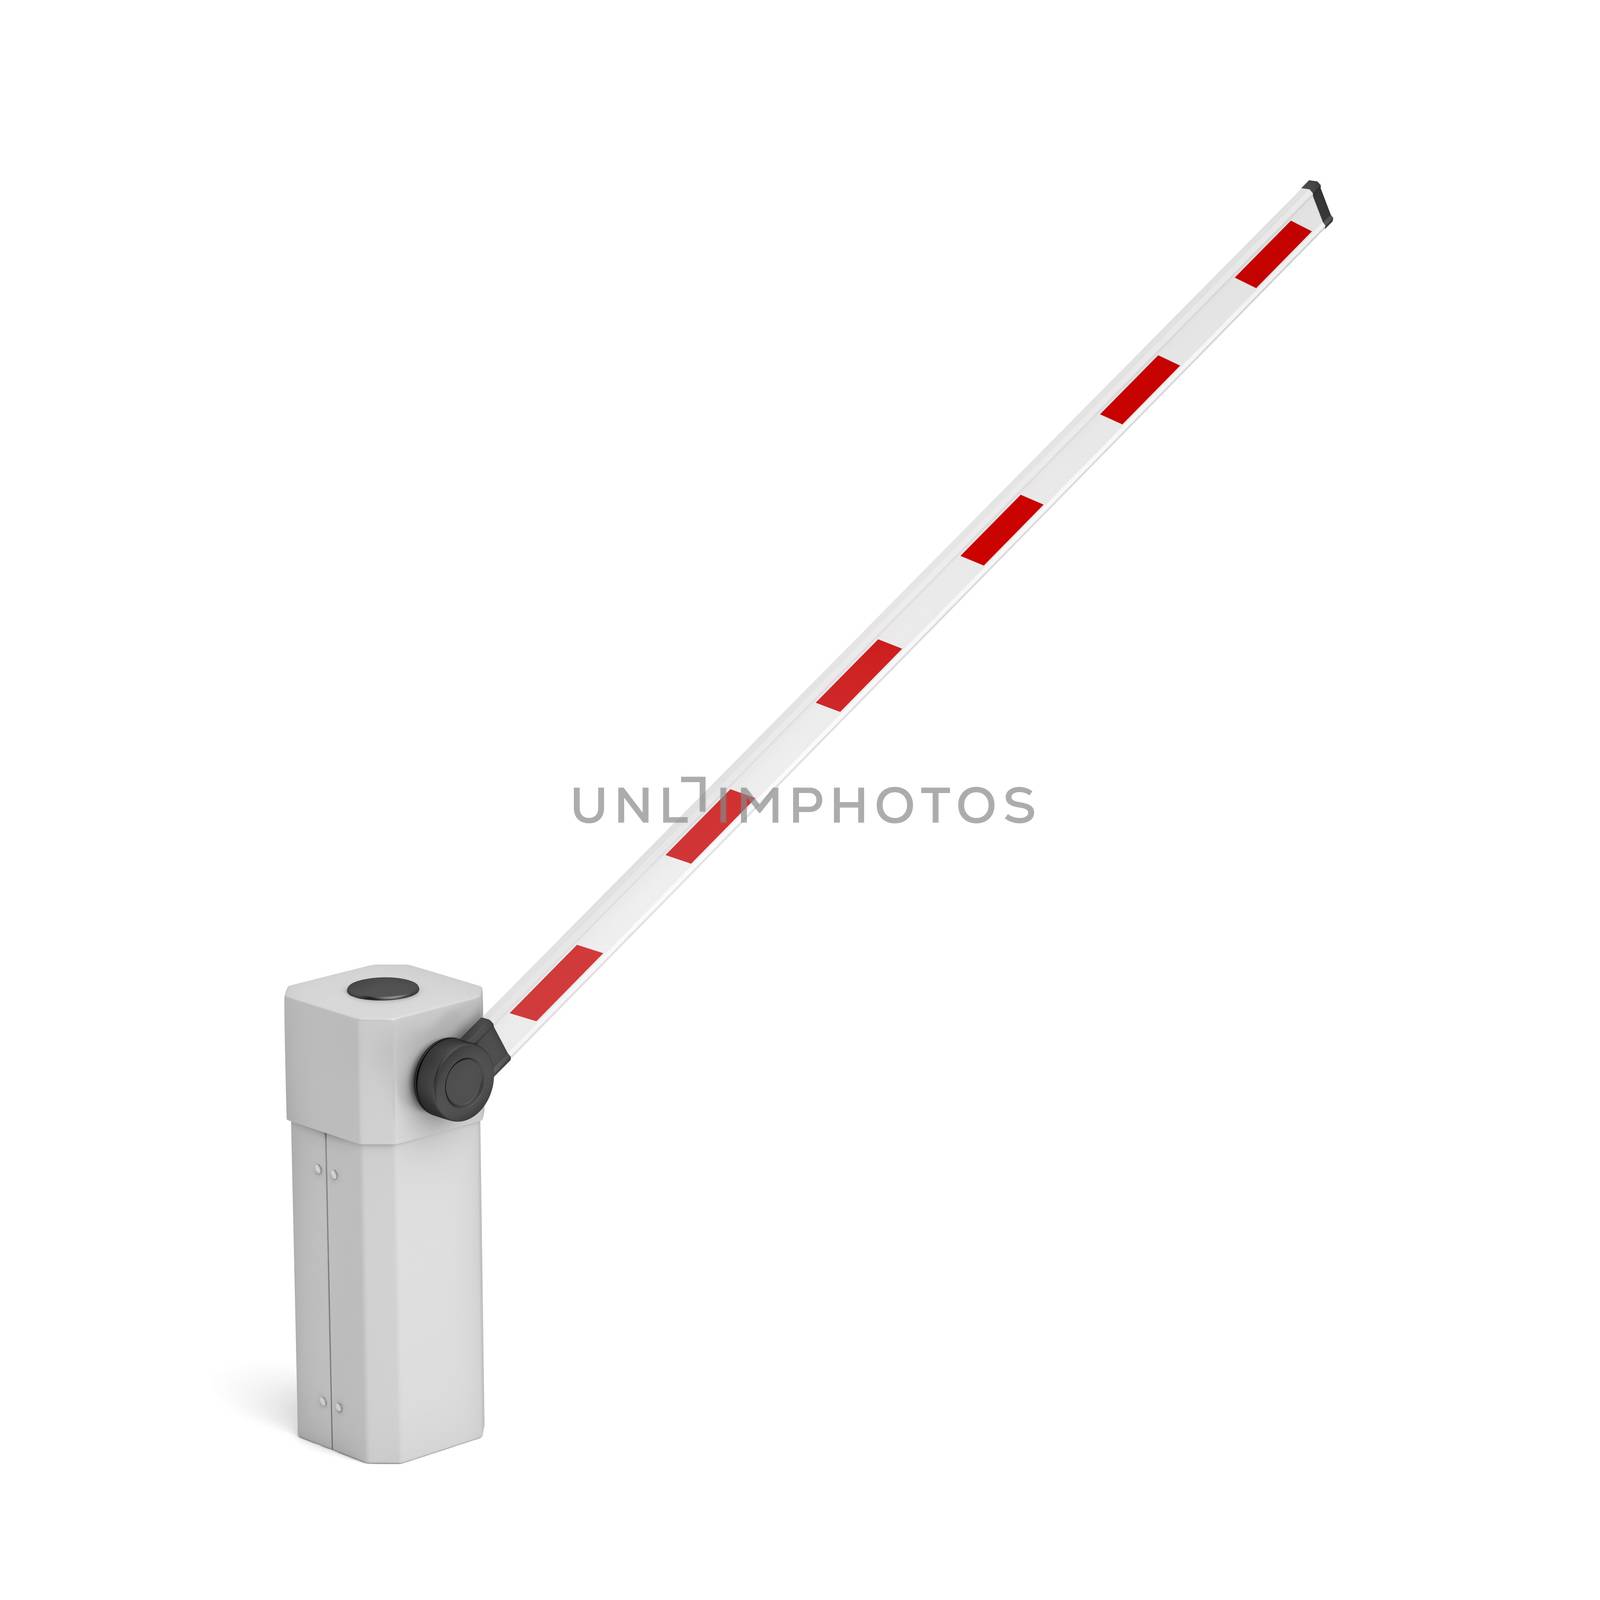 Open boom barrier on white background